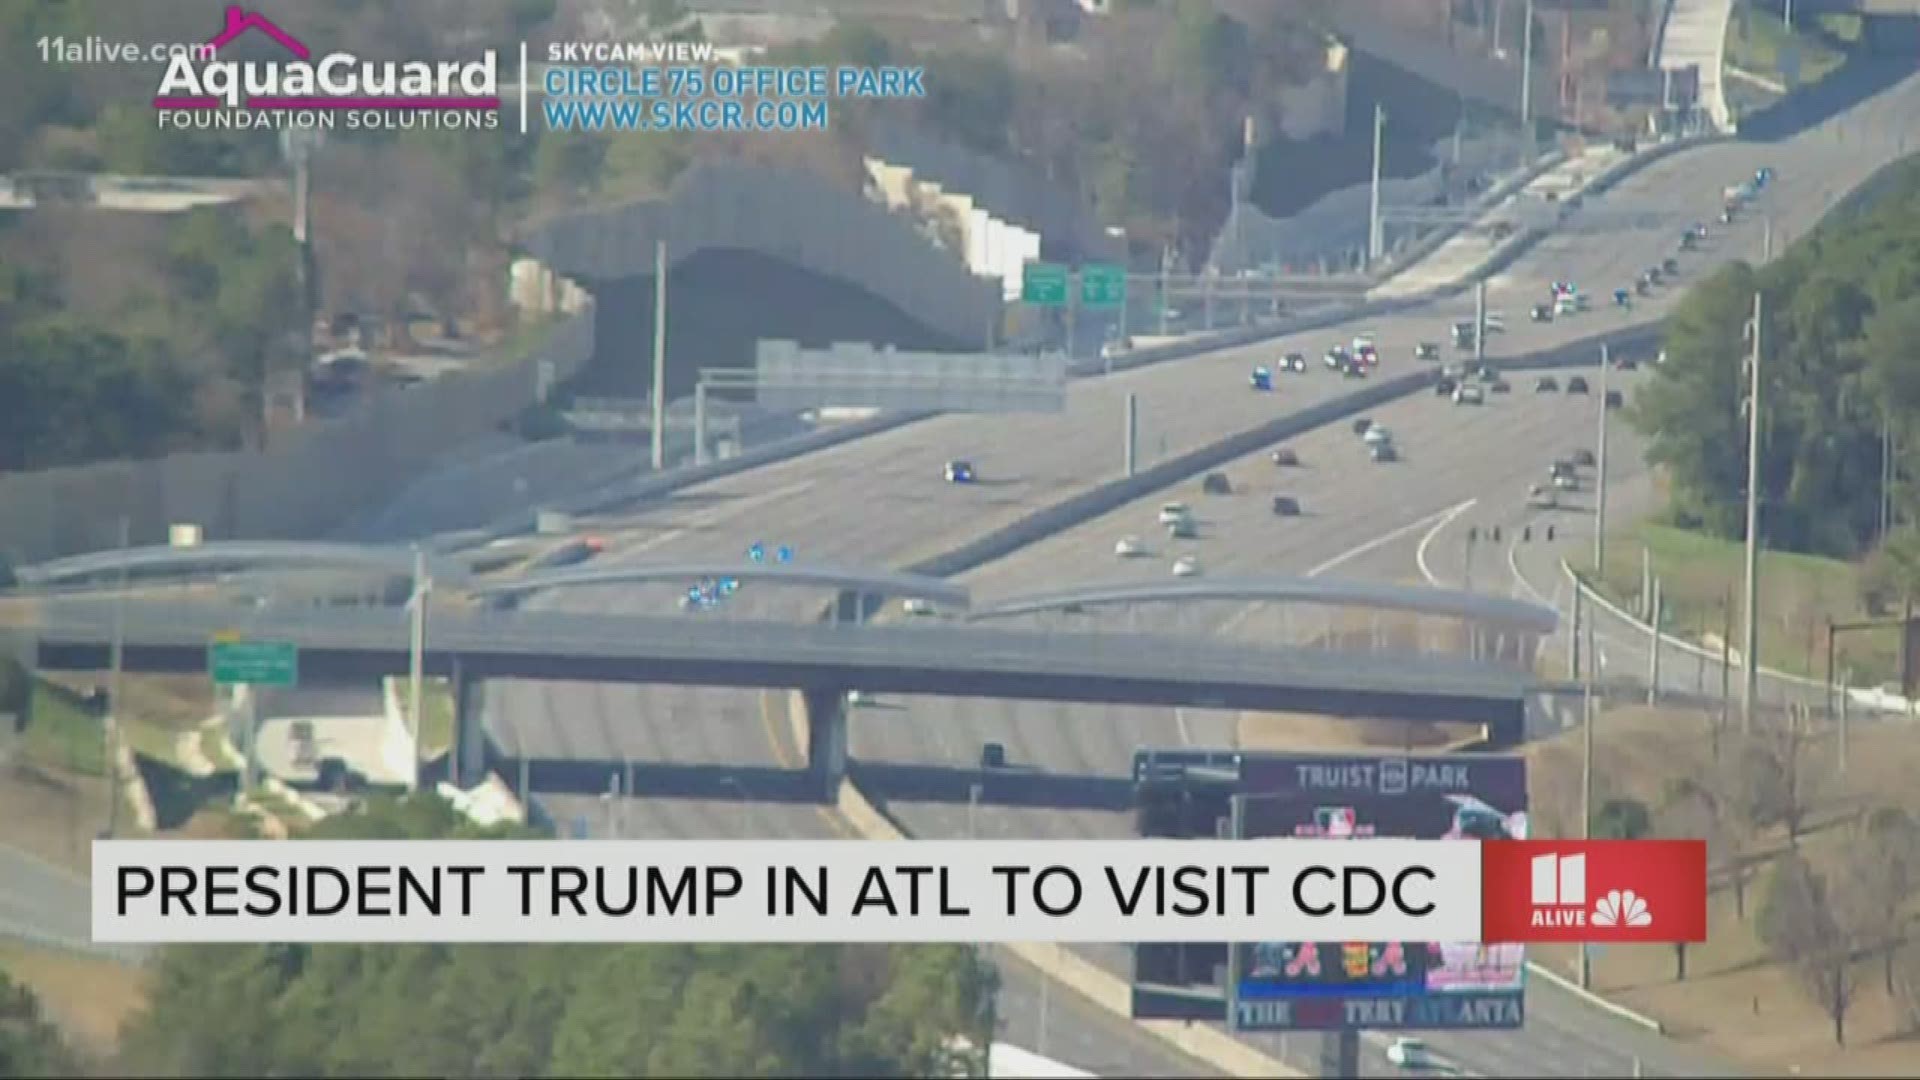 The president will be in town to tour the Atlanta-based CDC amid the spread of coronavirus, officially known as COVID-19.